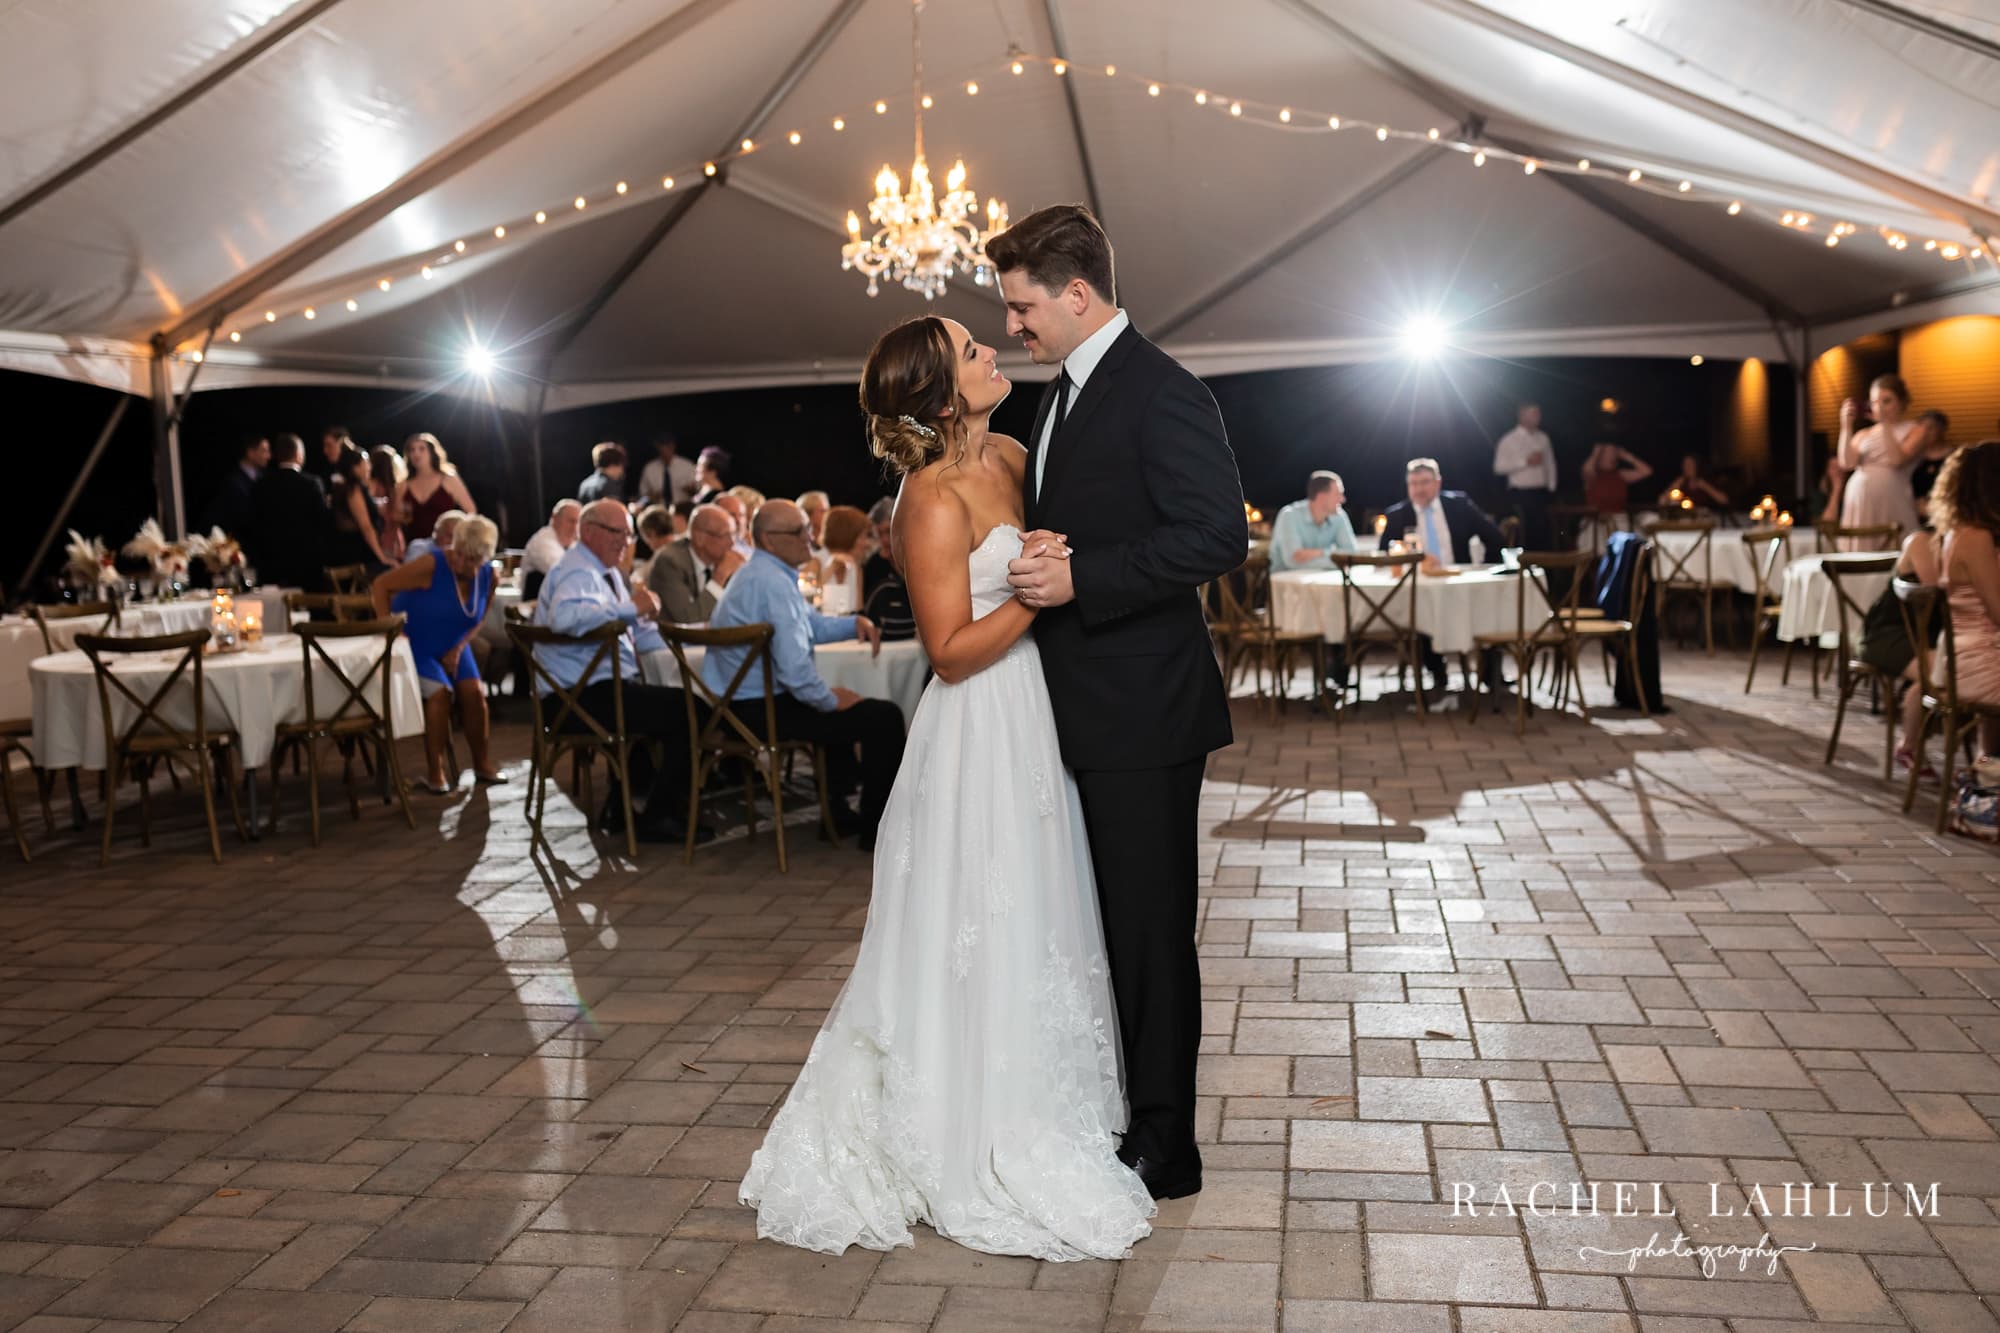 Bride and groom share a first dance at night, beneath the tent at Legacy of the Lakes Museum in Alexanrdia, Minnesota.